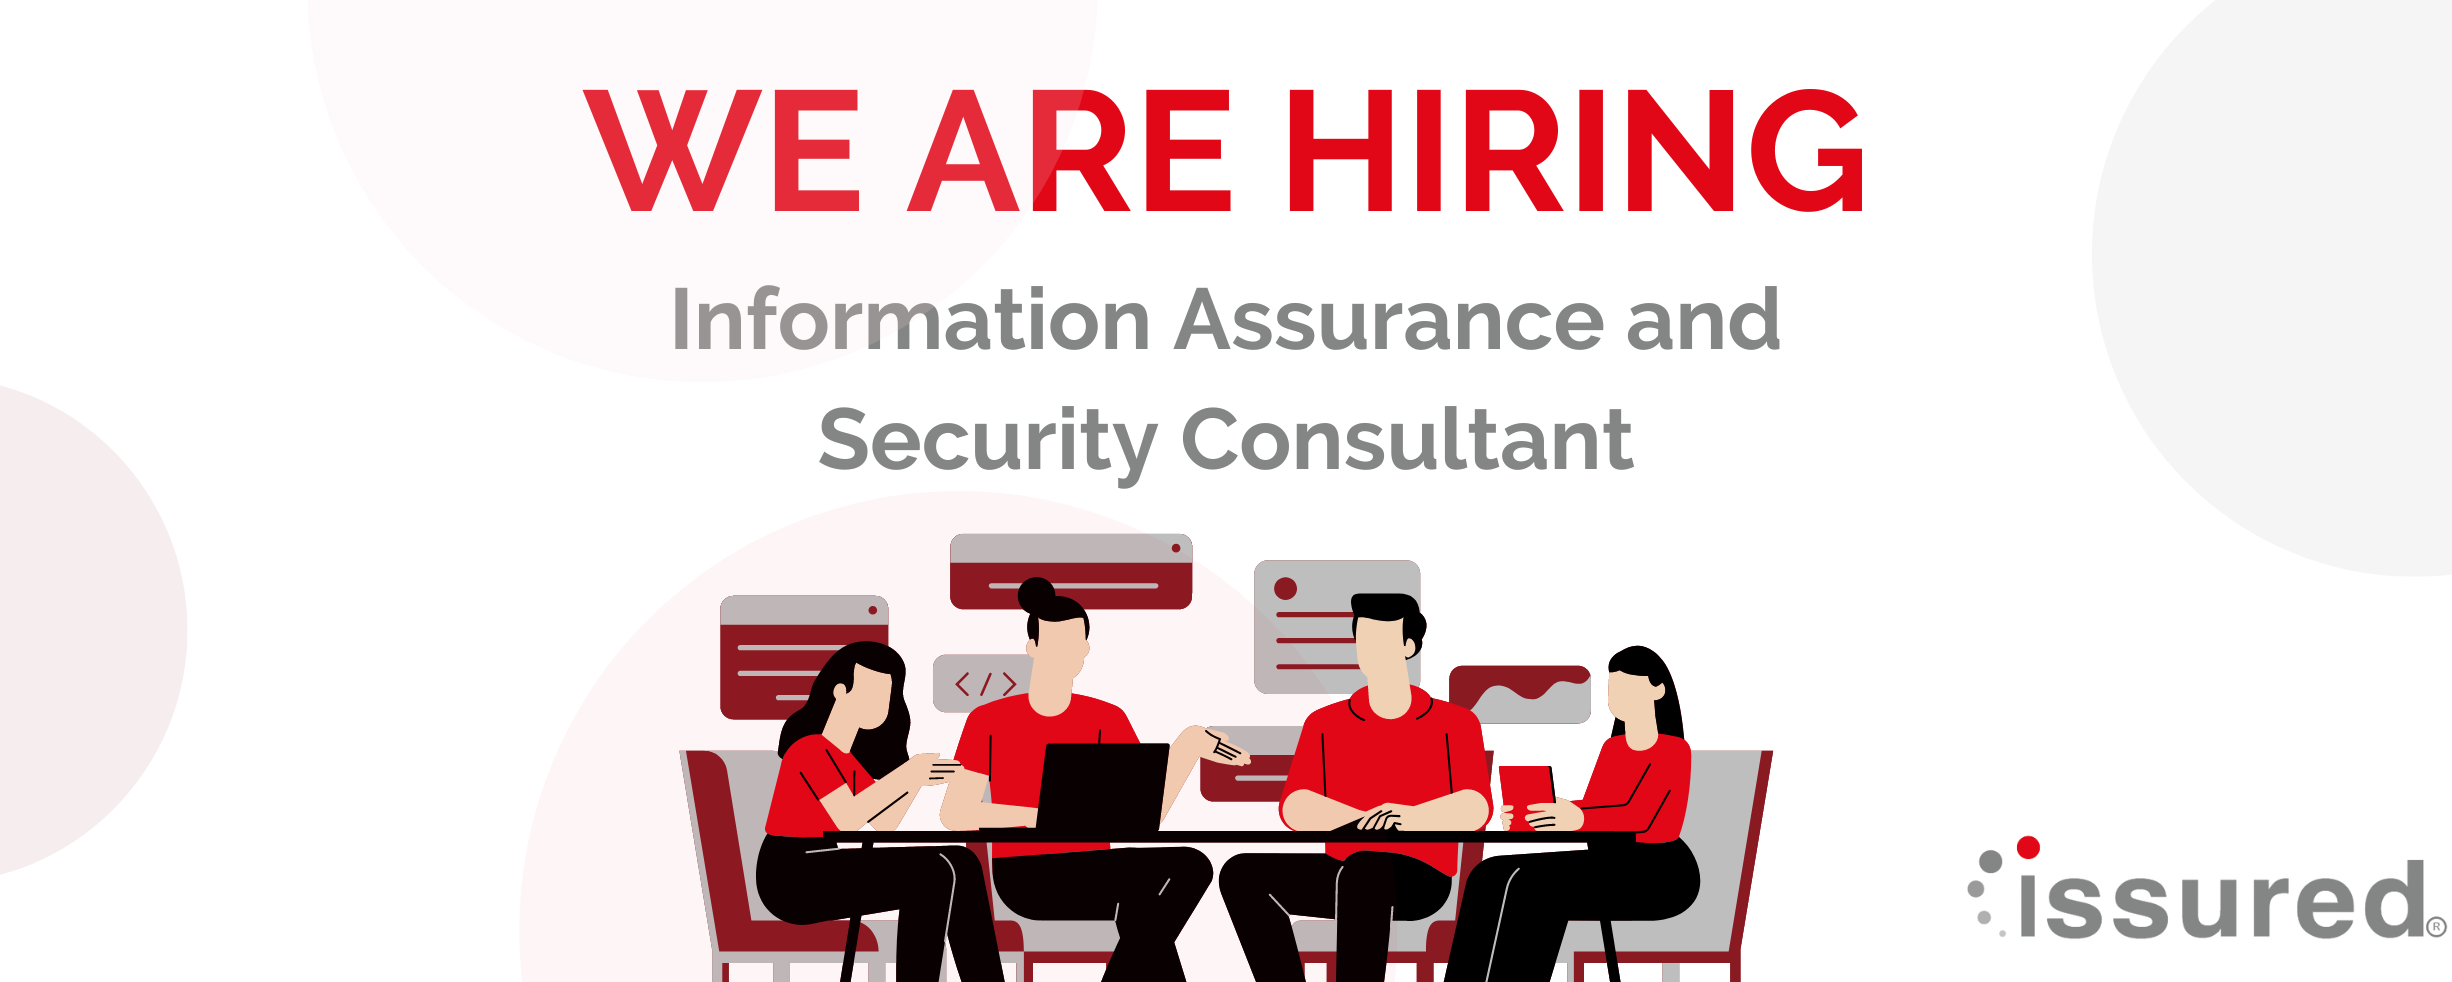 Information Assurance and Security Consultant